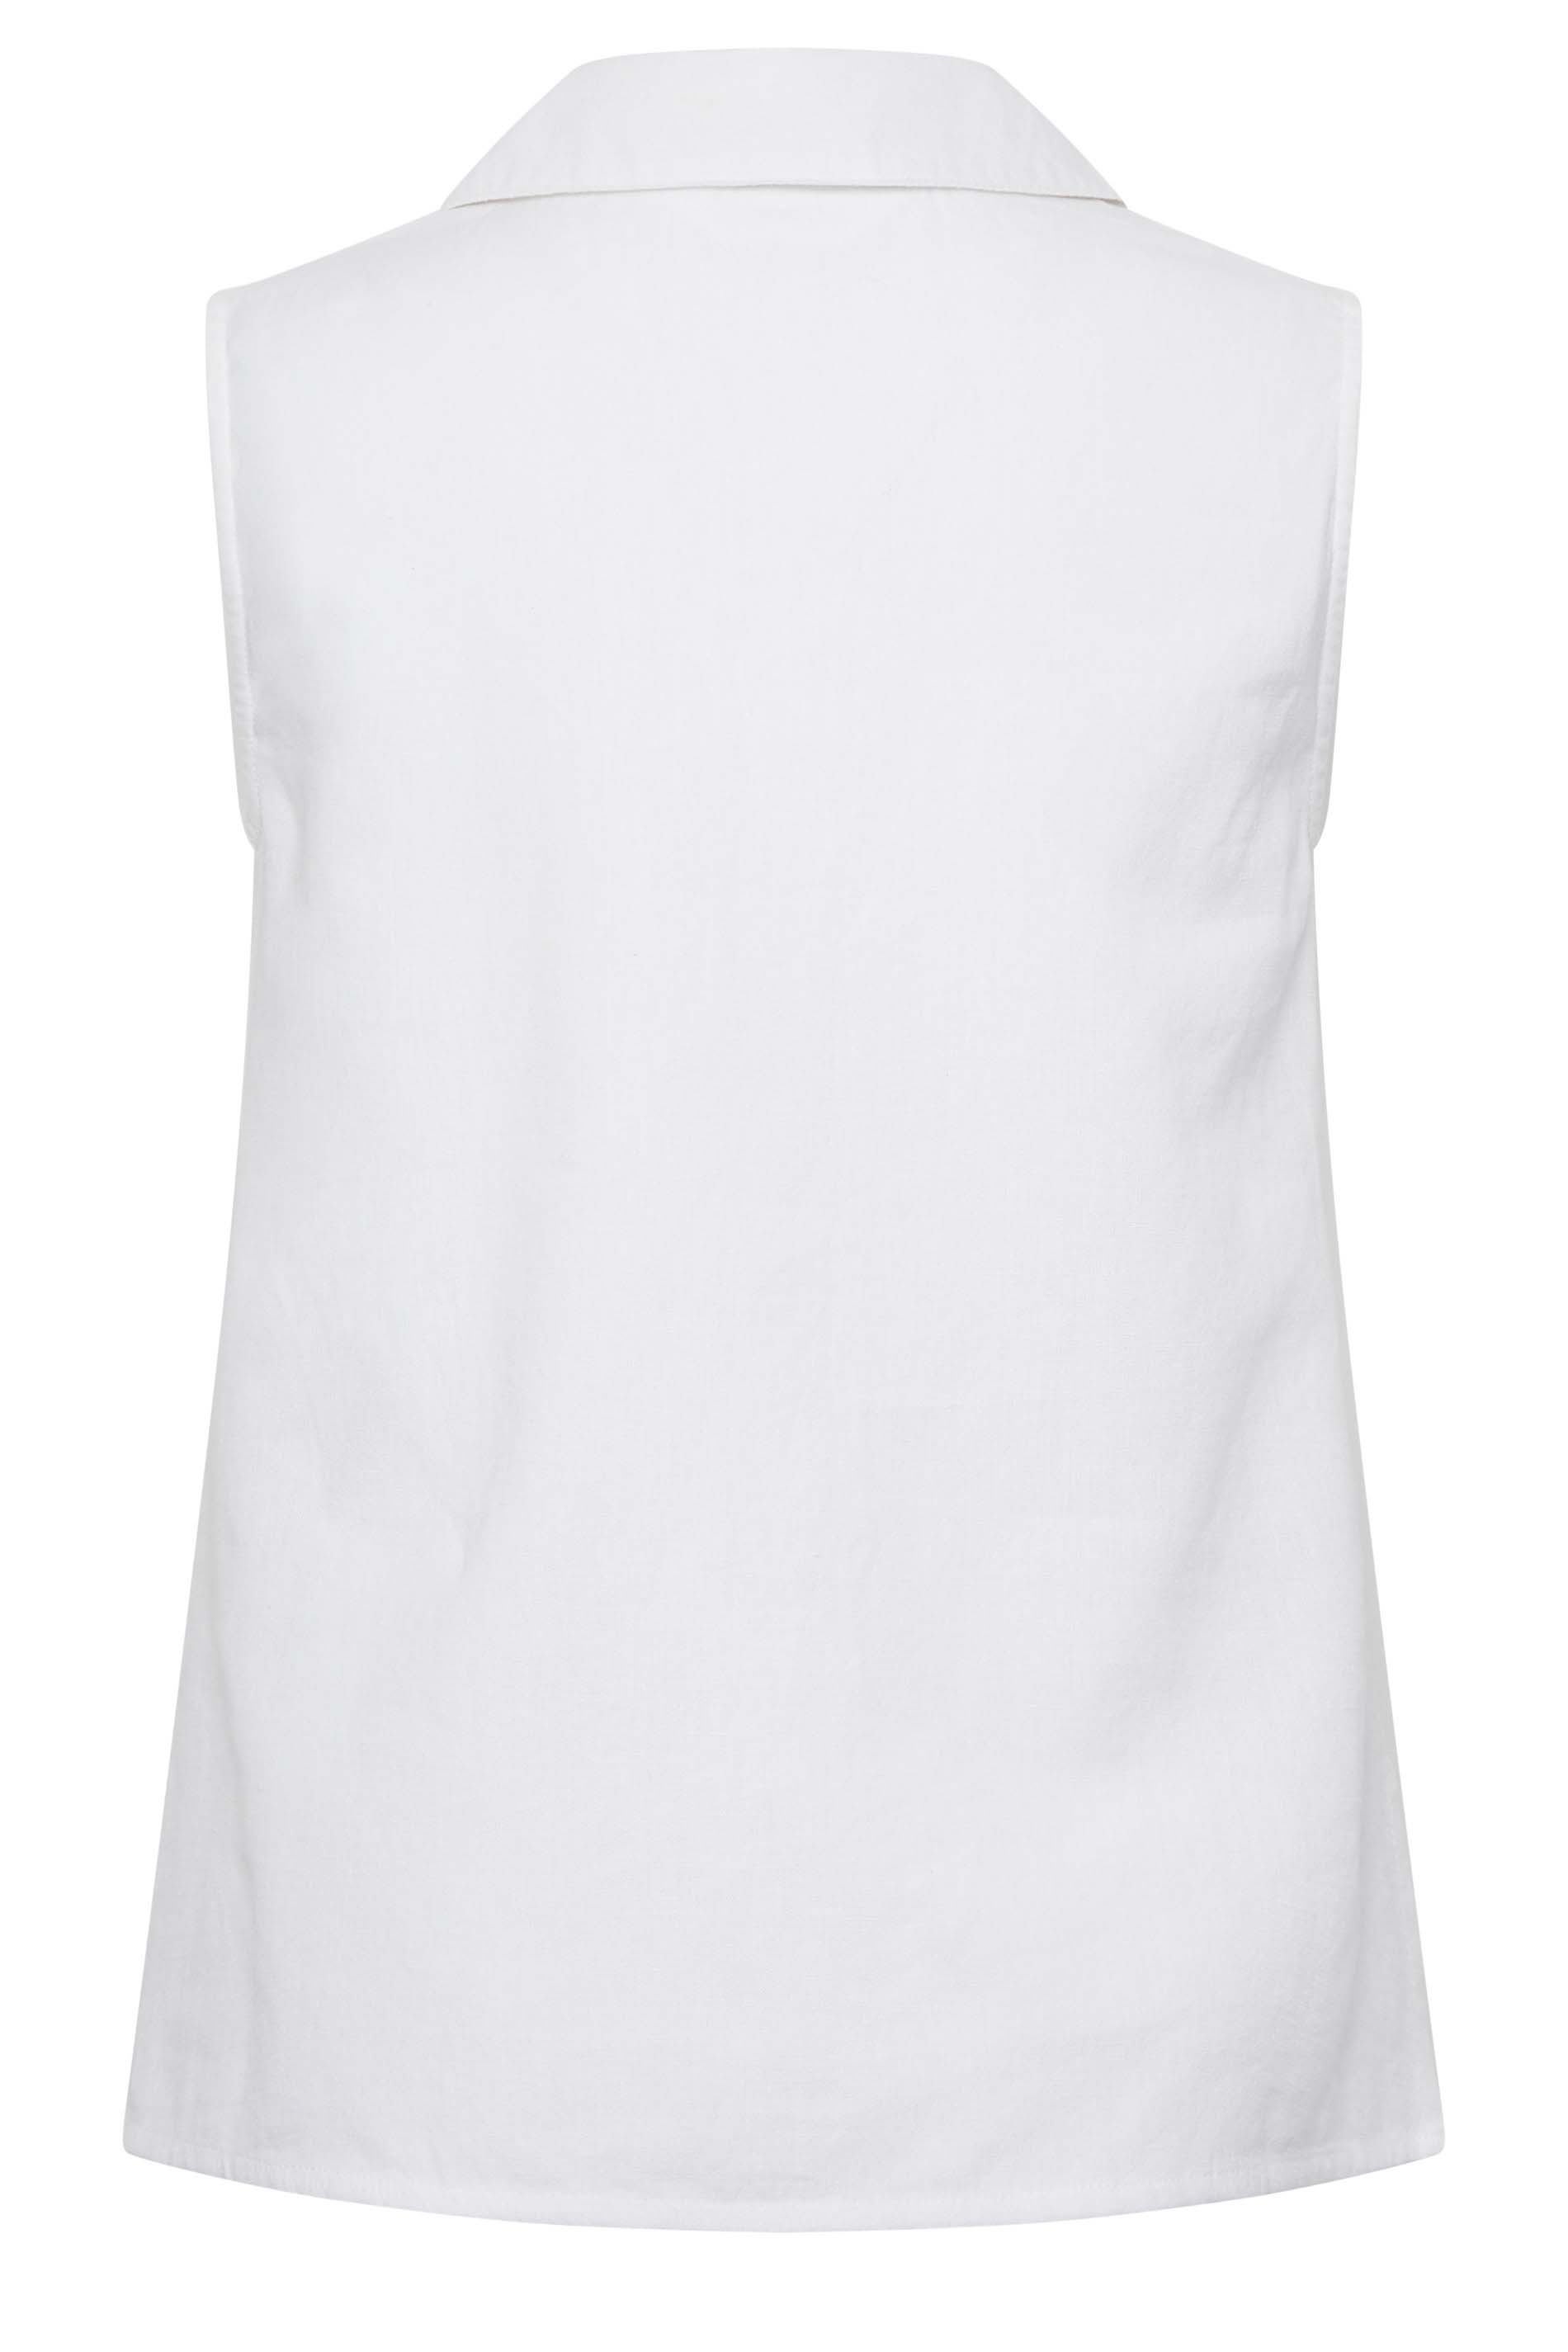 YOURS PETITE Plus Size White Linen Blend Sleeveless Shirt | Yours Clothing 2